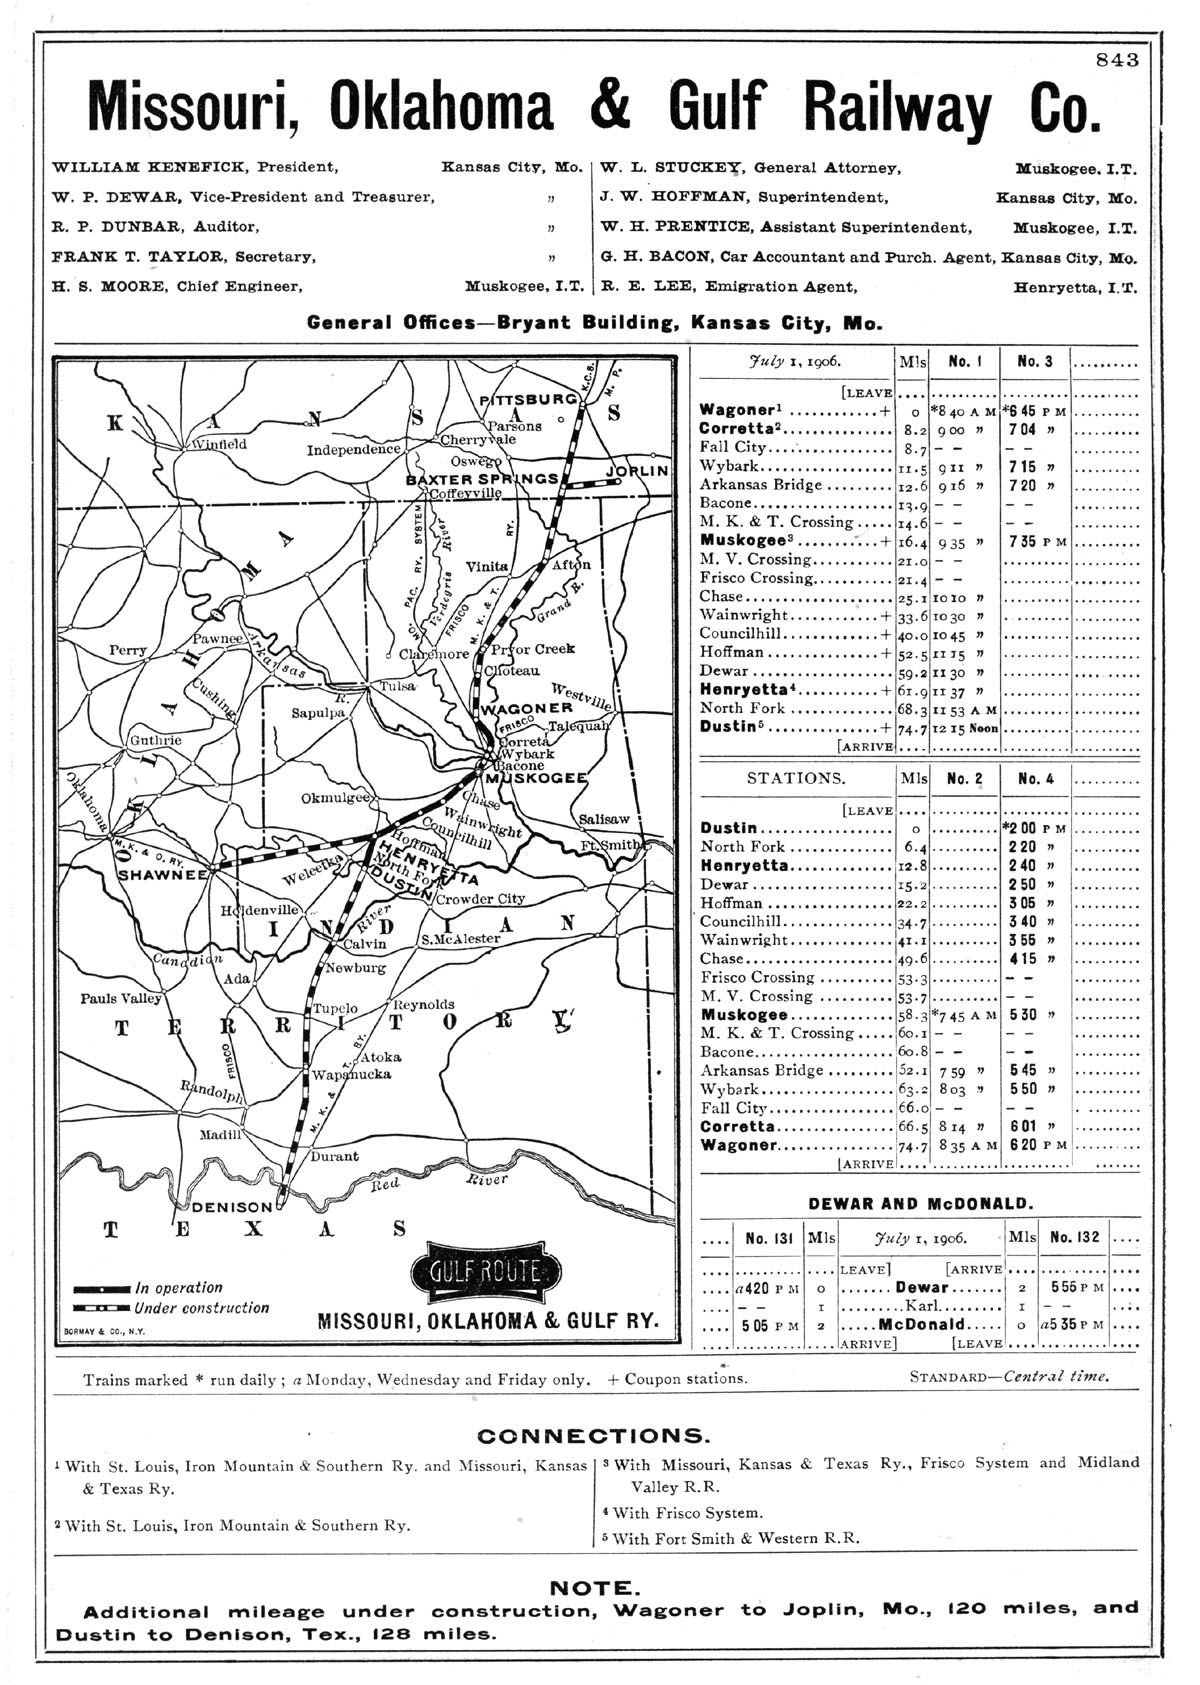 Missouri, Oklahoma & Gulf Railway Company (Okla., Tex.), Public Timetable and Map Showing Route in 1906.